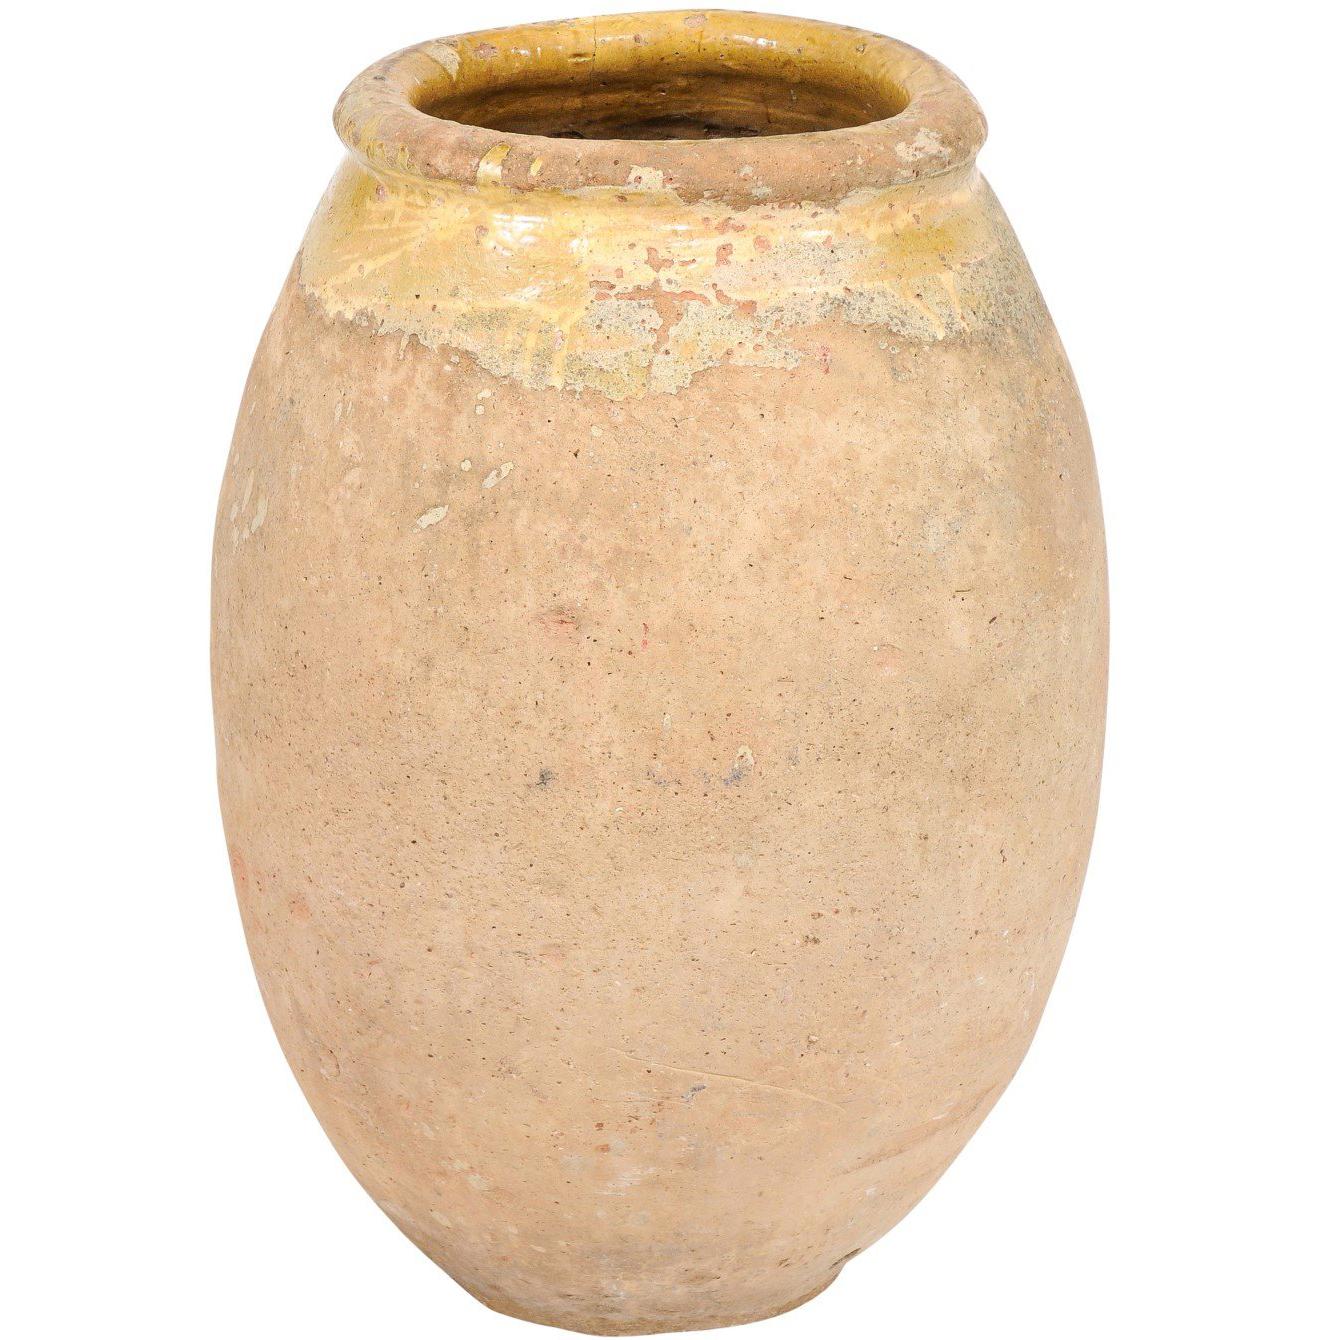 French, 18th Century Provincial Terracotta Biot Jar with Yellow Glazed Accents